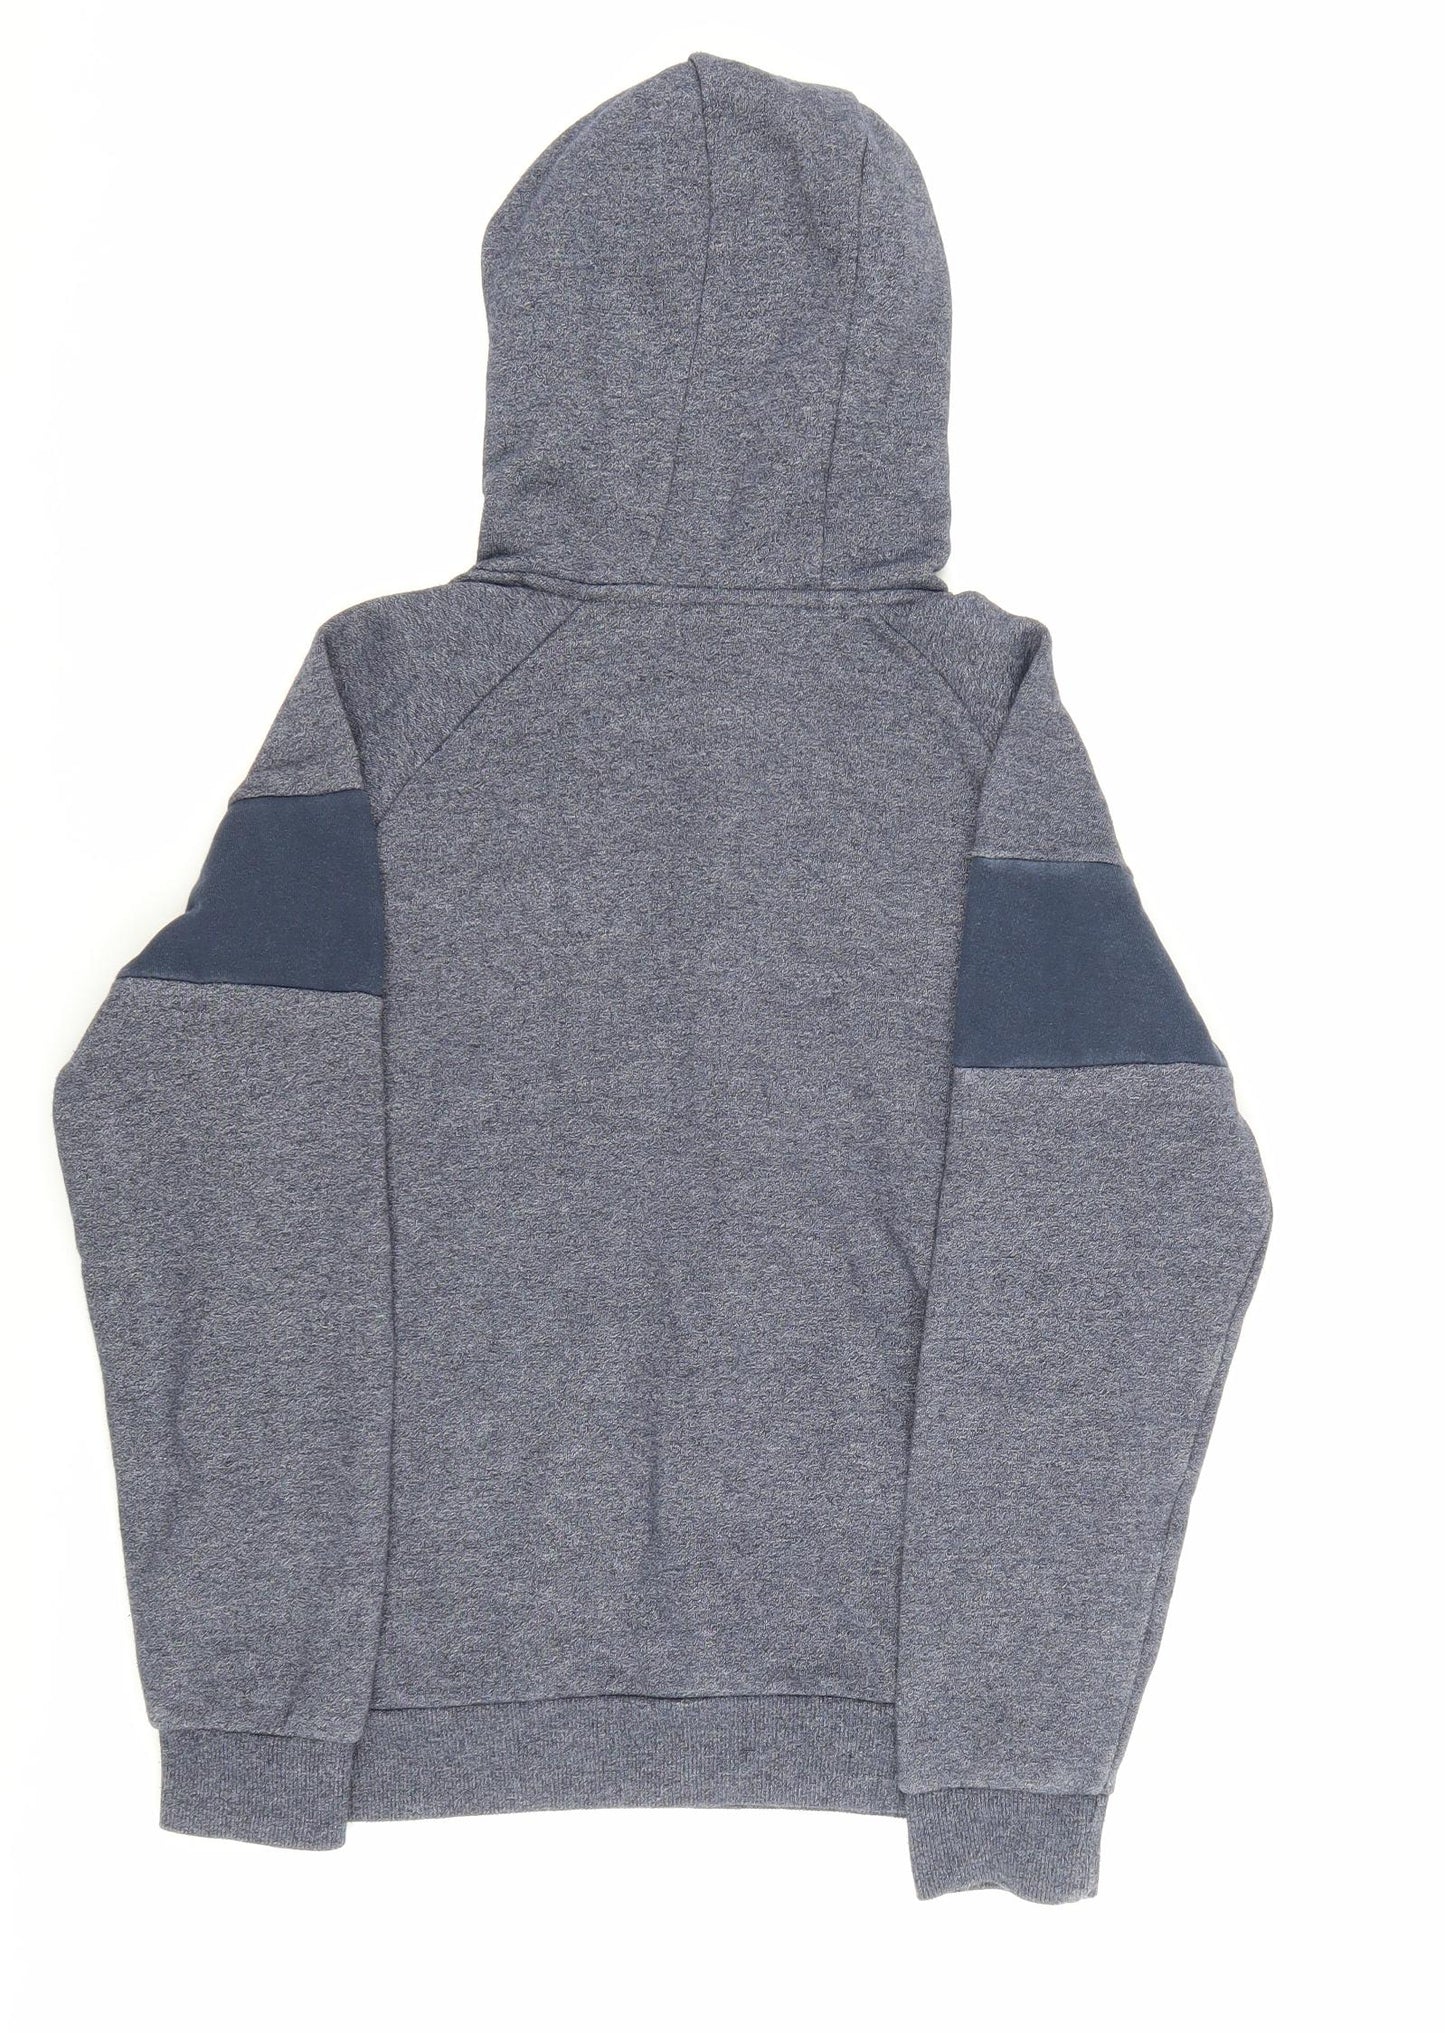 ellesse Boys Blue Cotton Pullover Hoodie Size 12-13 Years